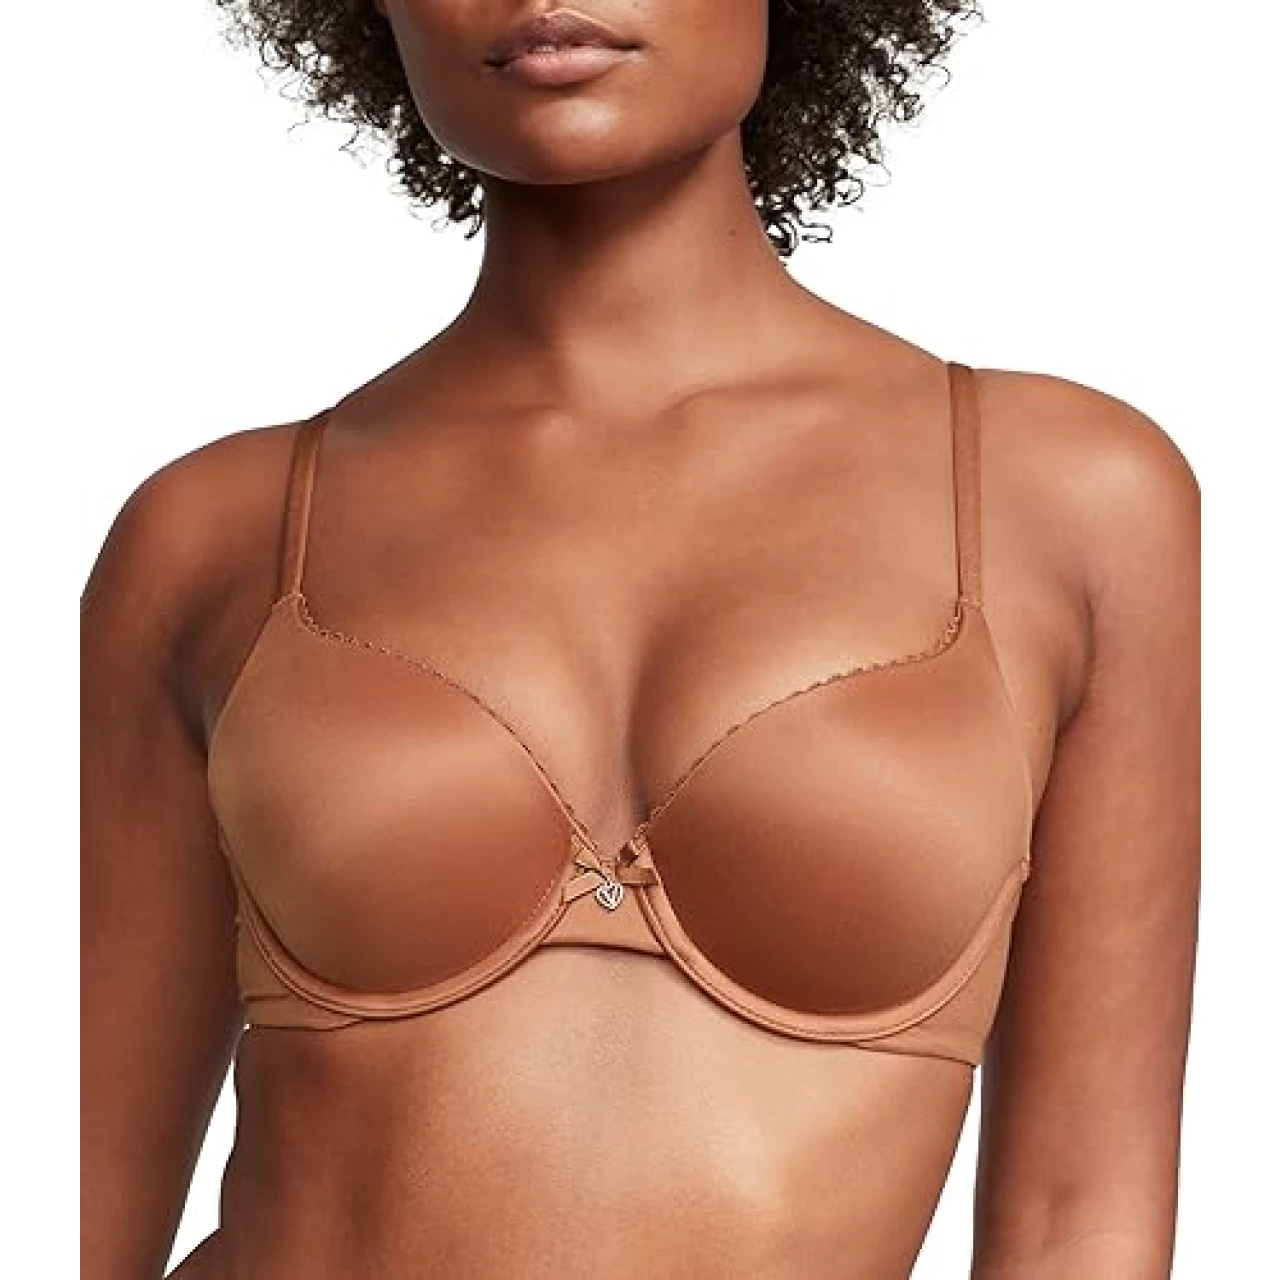 Victoria&rsquo;s Secret Perfect Shape Push Up Bra, Full Coverage, Padded, Smooth, Bras for Women, Body by Victoria Collection, Caramel (32D)